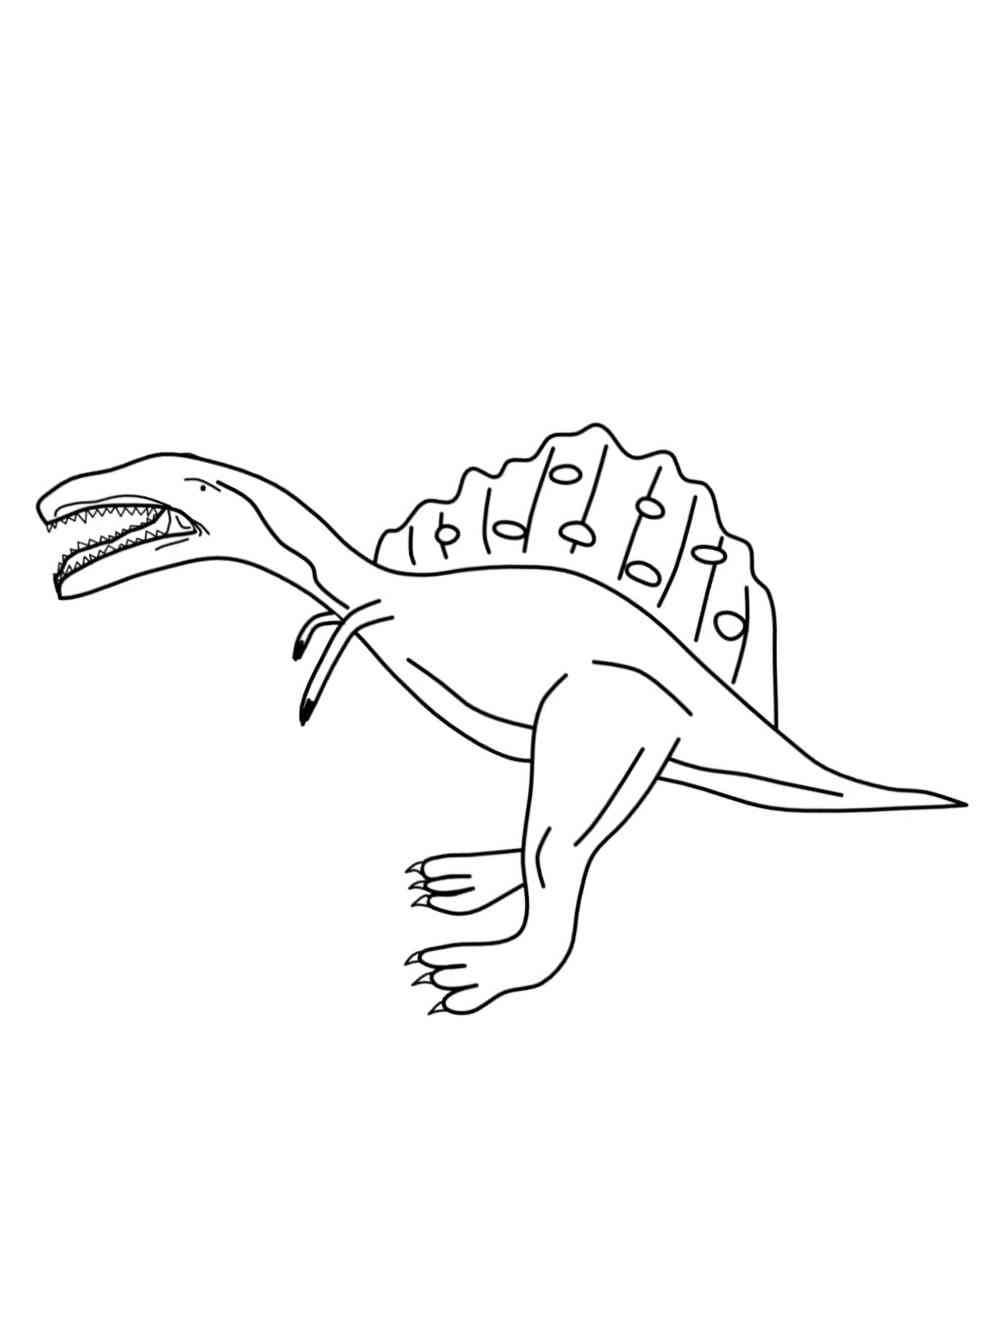 Easy Spinosaurus coloring page